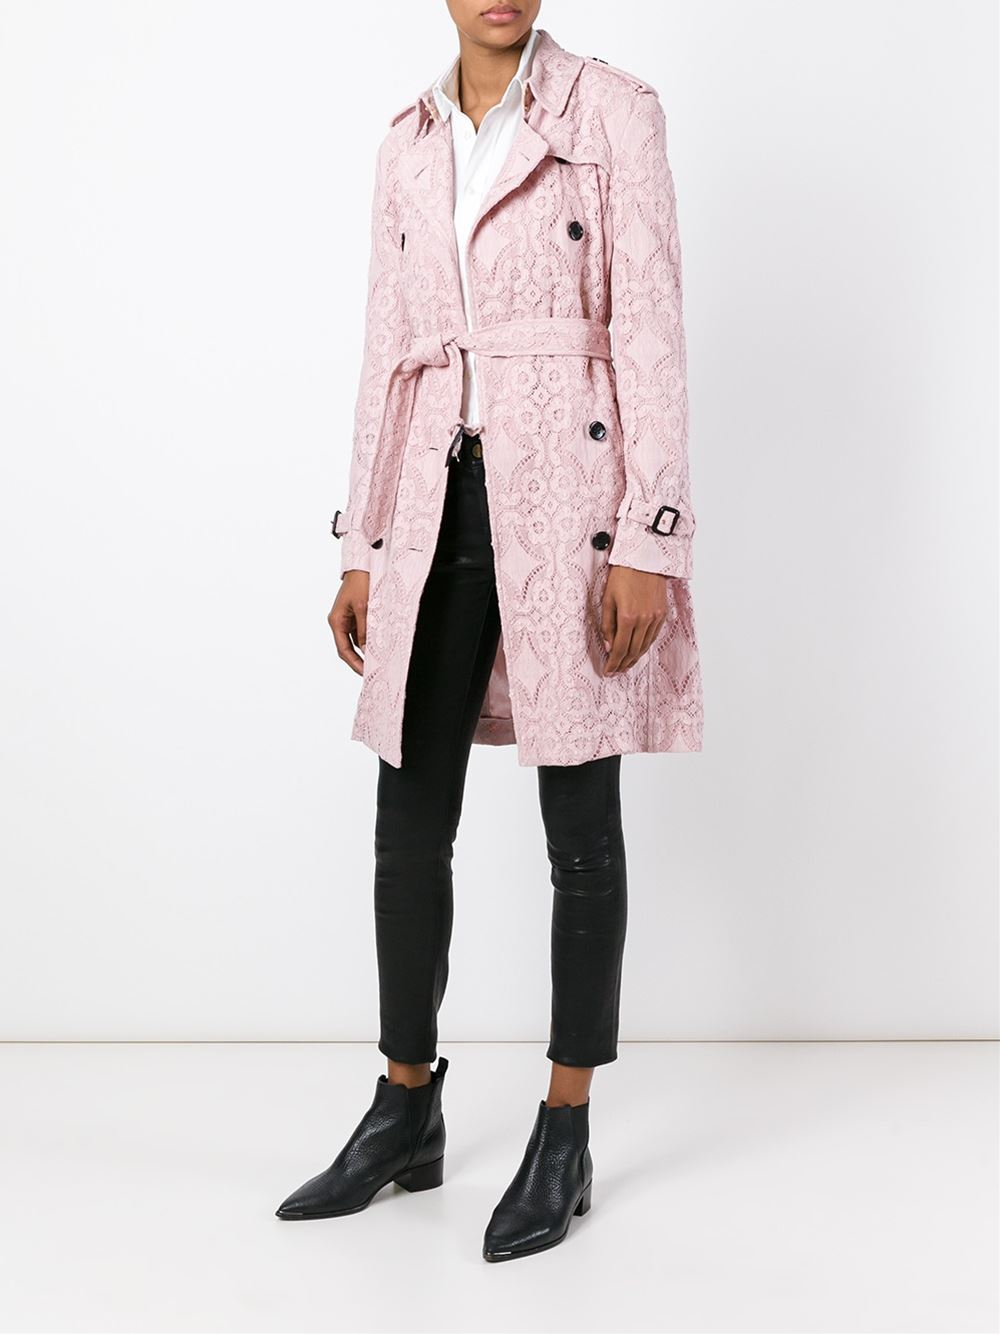 Burberry Floral Lace Trench Coat in Pink & Purple (Pink) | Lyst